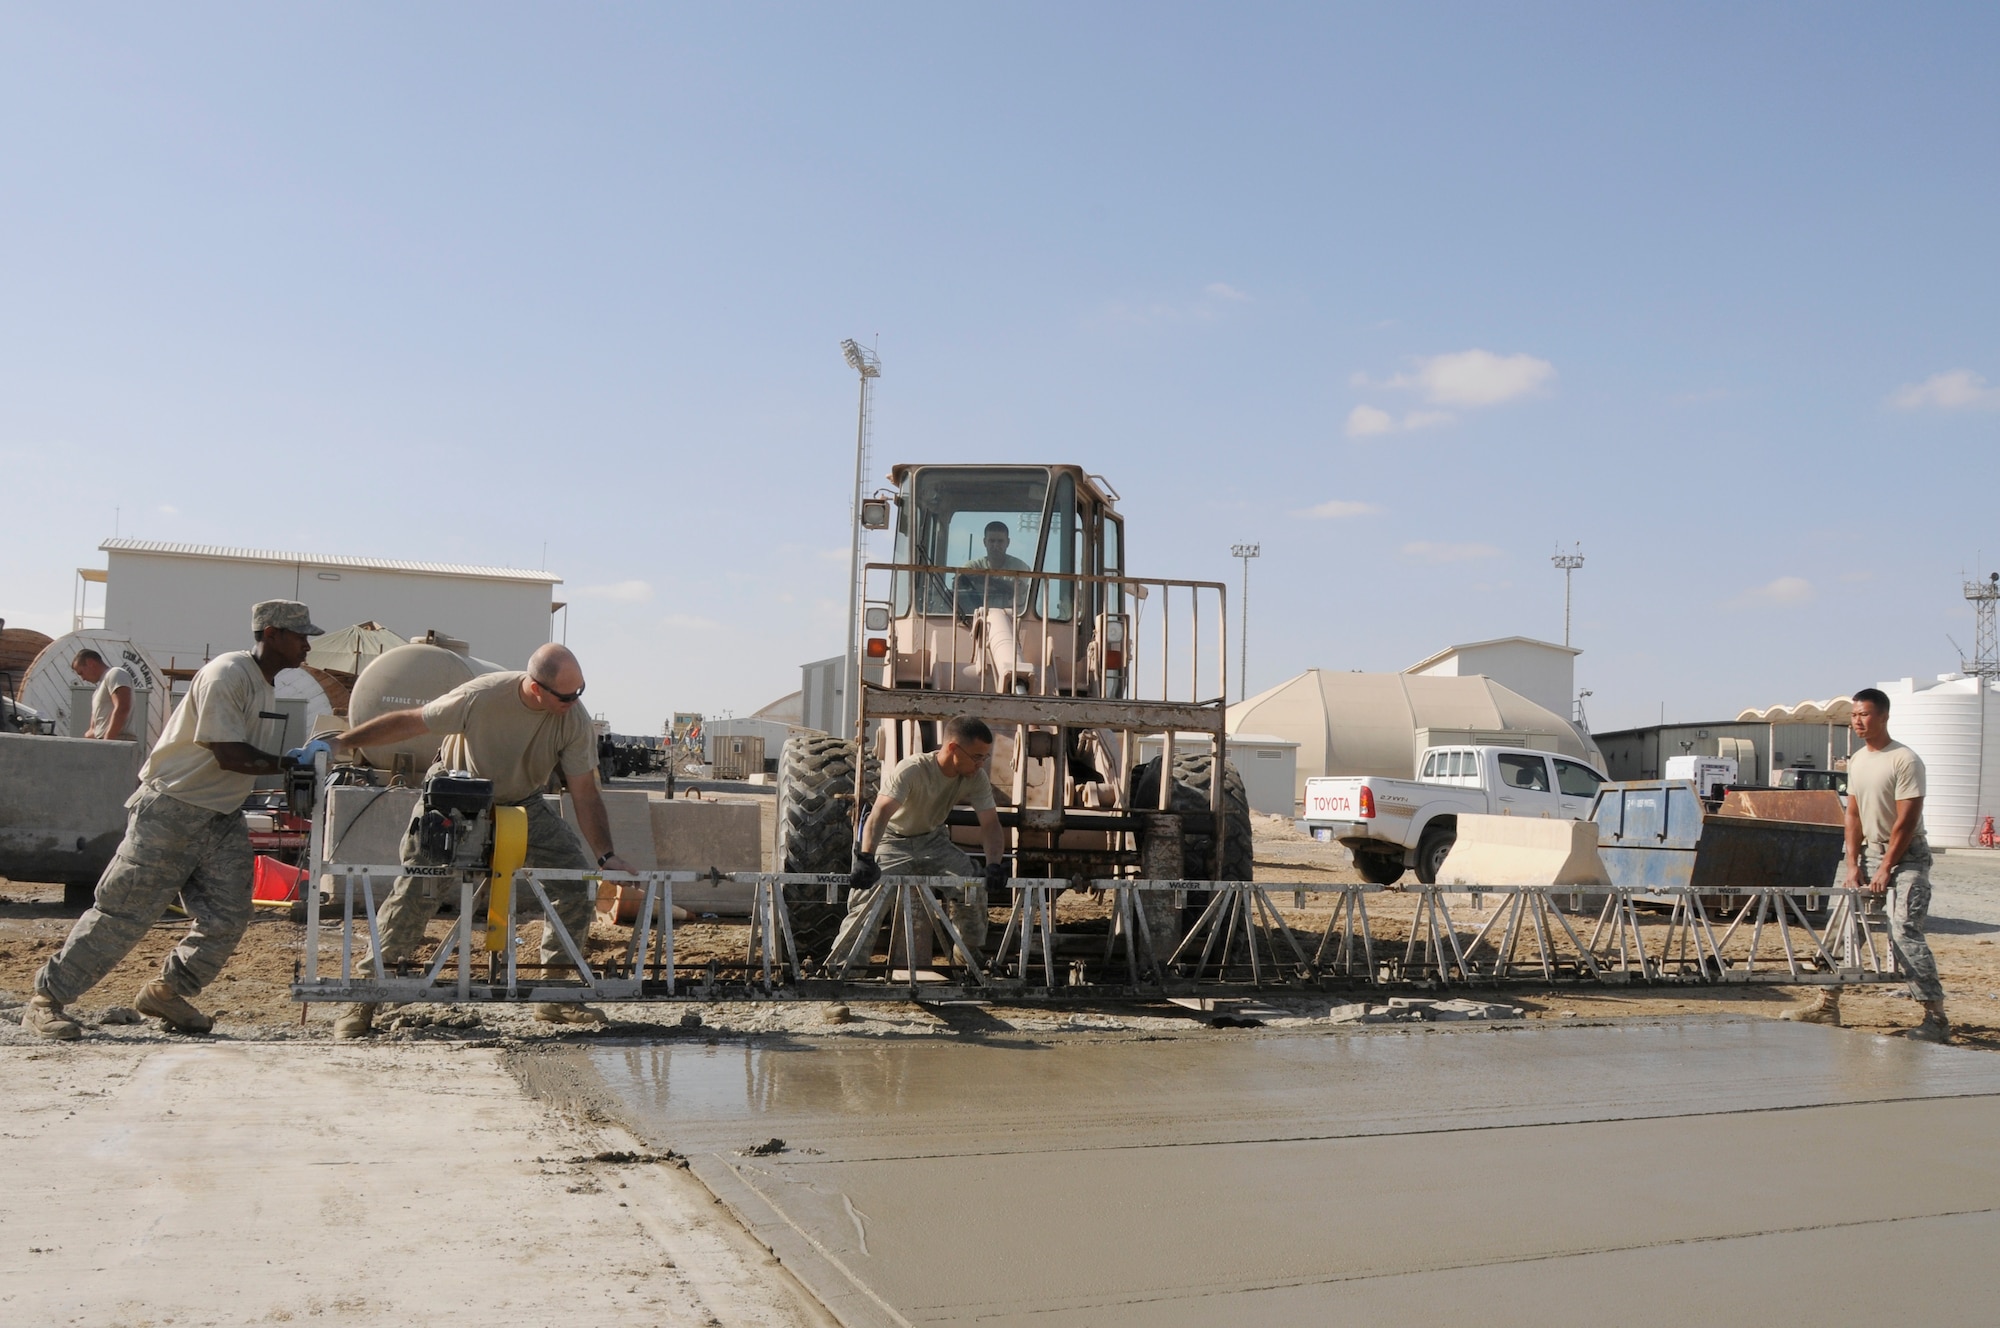 SOUTHWEST ASIA - Members of the 380th Expeditionary Civil Engineer Squadron, pavement and heavy equipment lift a screed after leveling a slab of concrete, Feb 5. The screed consolidates and levels the concrete to a flat surface. When finished the concrete slab will be used for a food storage area for the new dining facility at the 380th Air Expeditionary Wing. Sergeant Pallas is deployed from Ellsworth AFB and hails from Washington. Sergeant Pitt is deployed from Bolling AFB, DC and hails from Virginia Beach, Va. Airman Batista is deployed from Andrews AFB, Md. and hails from Providence, R.I. (U.S. Air Force photo by Senior Airman Brian J. Ellis) (Released)